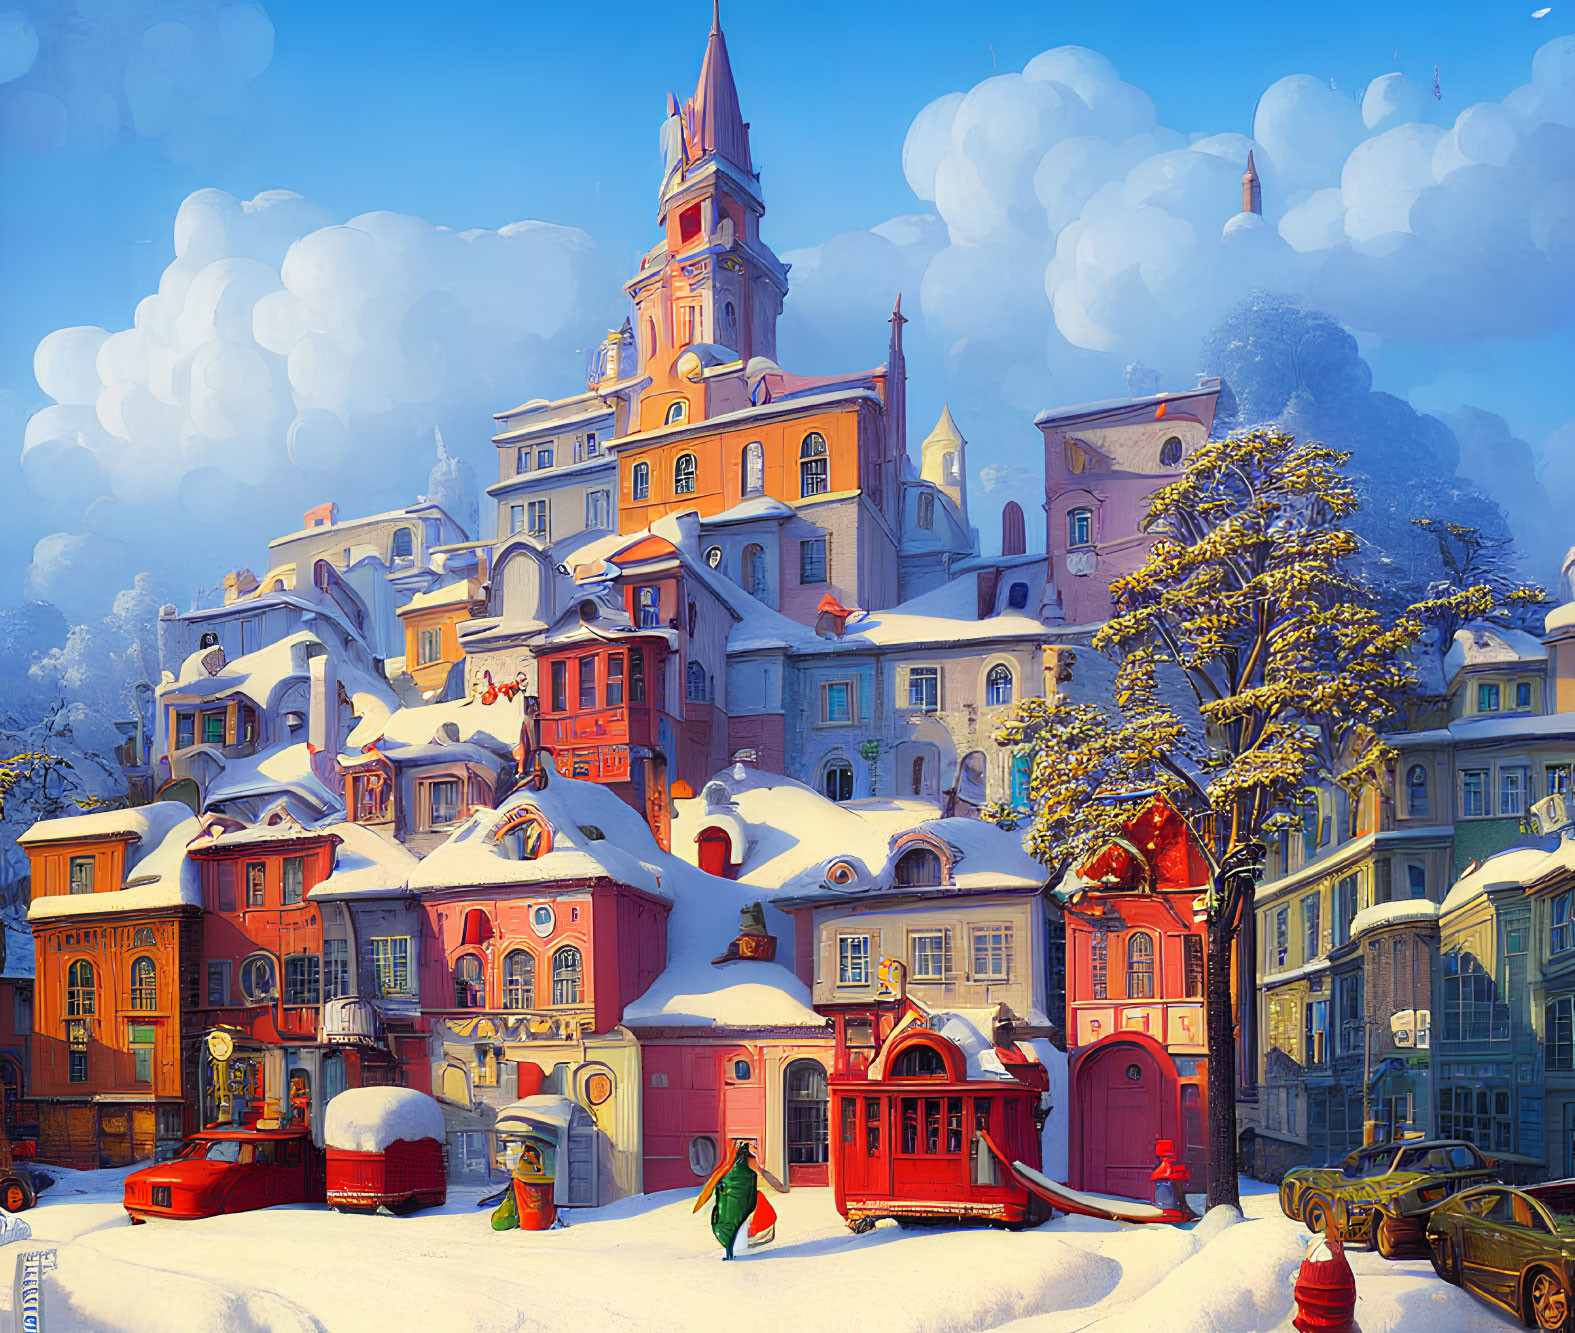 Whimsical snow-covered town with colorful buildings, castle, and vintage cars